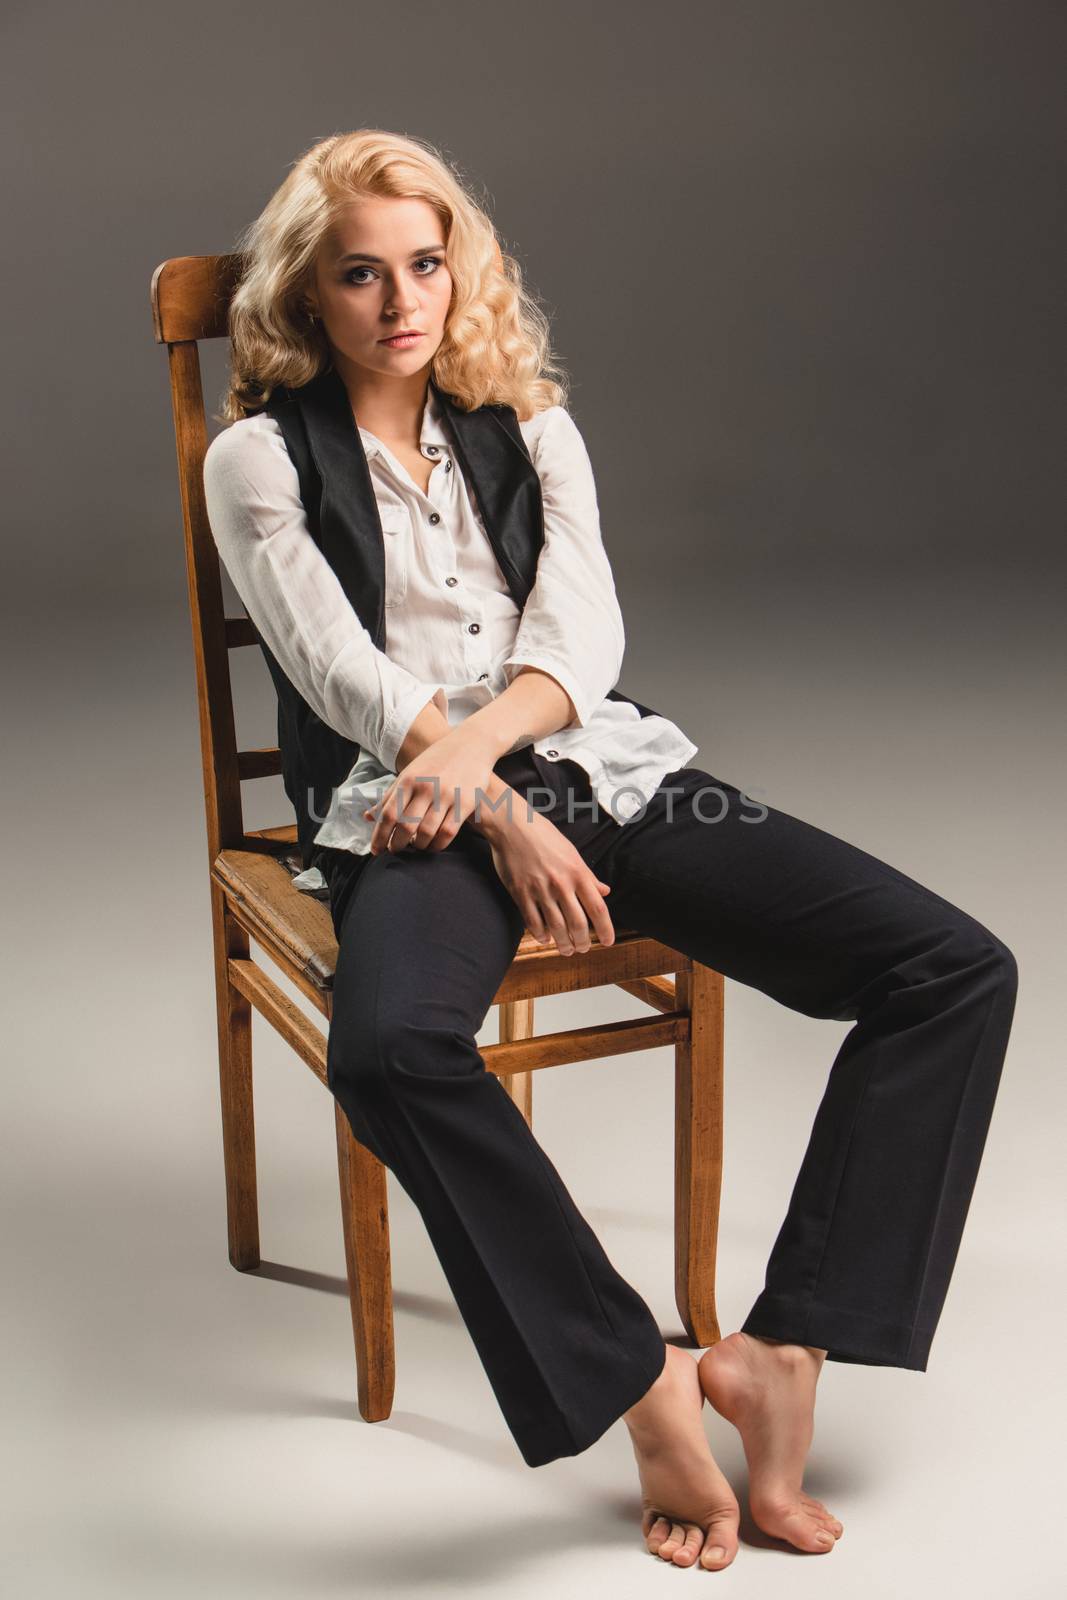 Beauty blond woman on chair by master1305